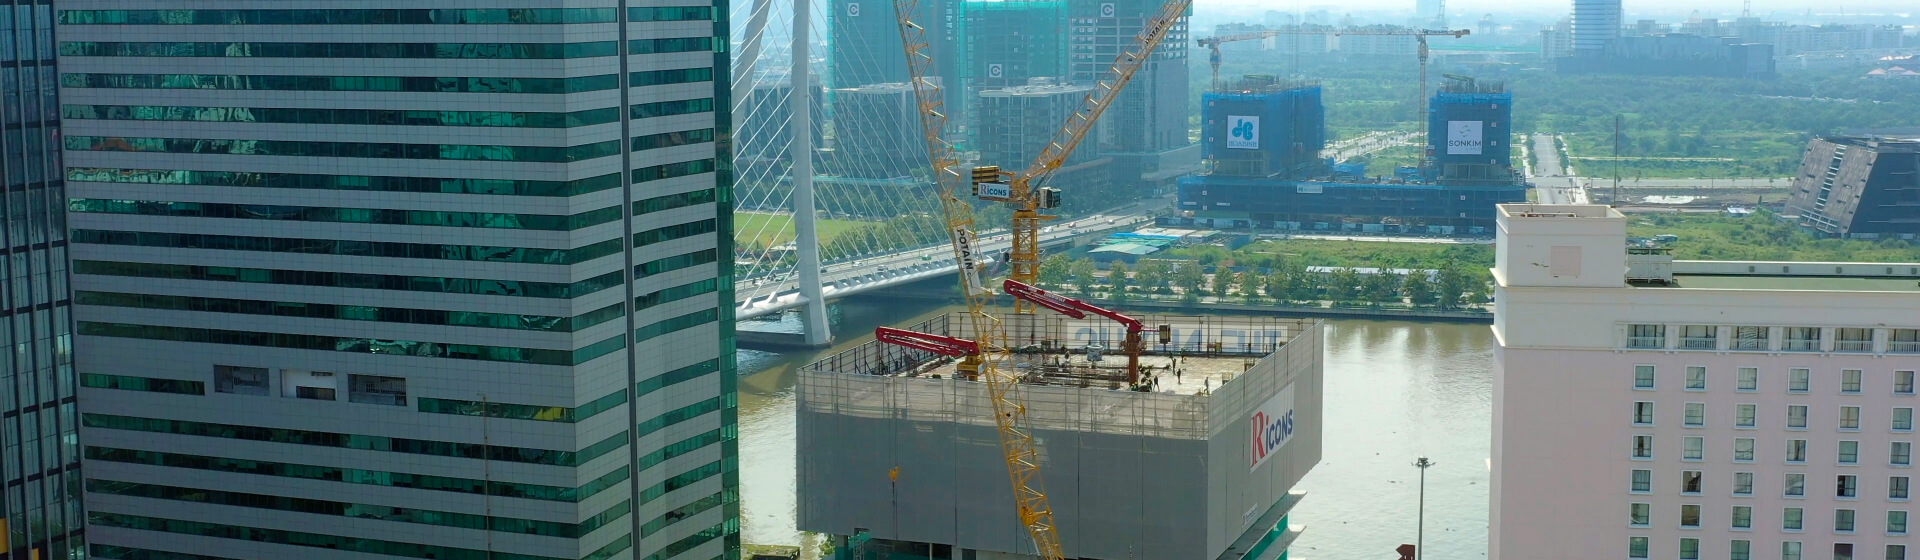 Two-Potain-MCH-175-cranes-selected-for-The-Nexus-in-Ho-Chi-Minh-City-Vietnam-1.jpg